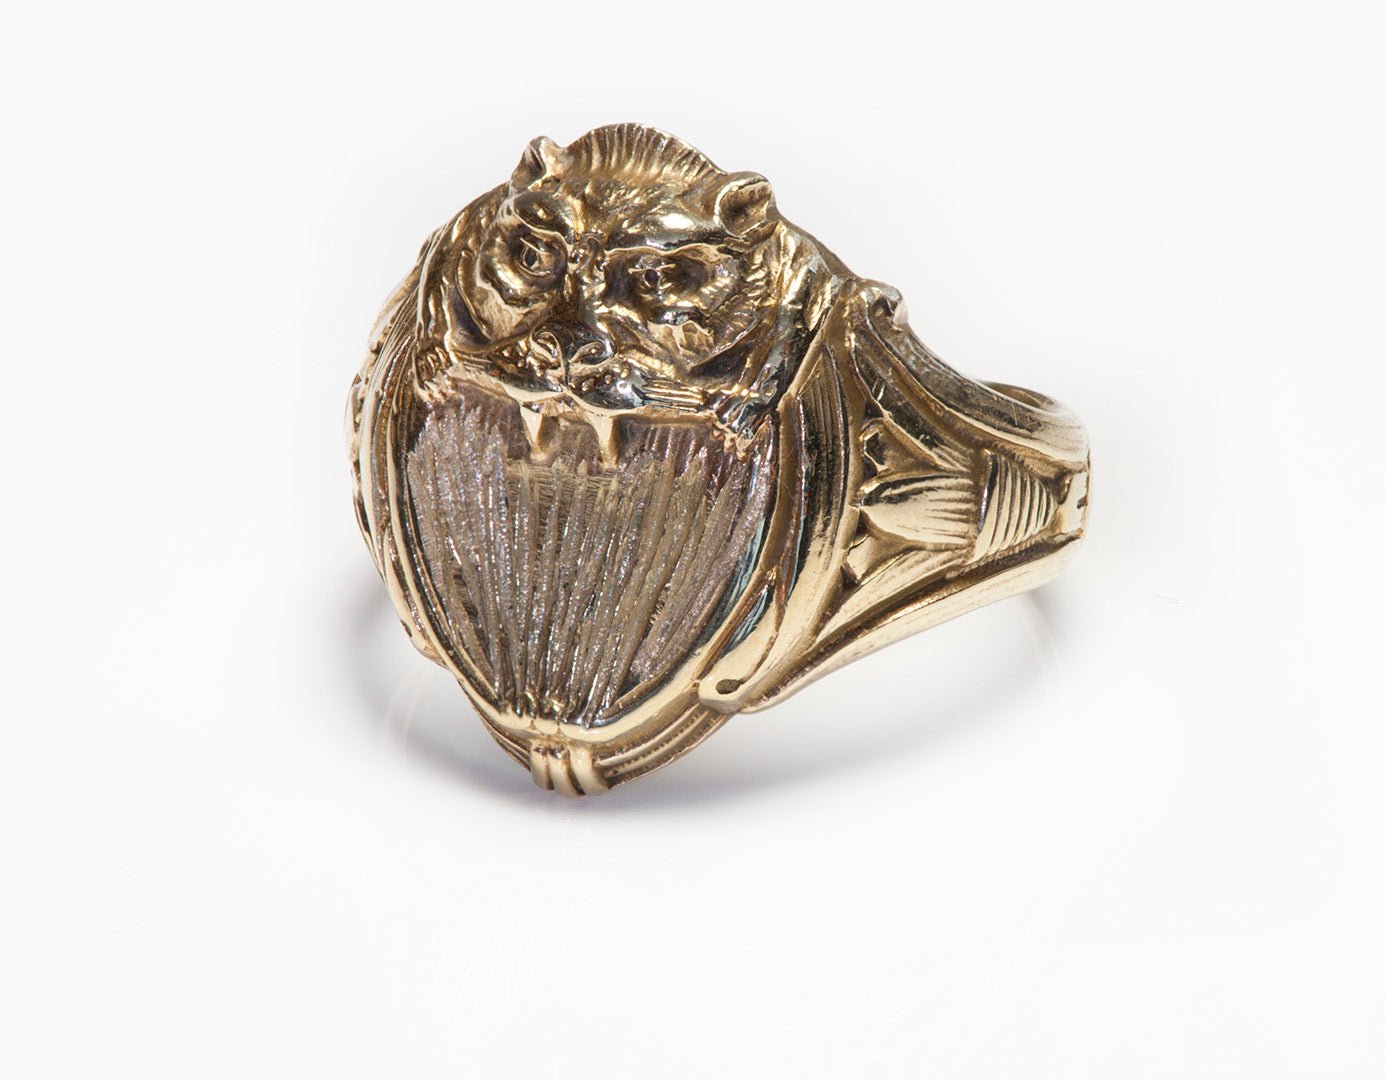 Antique 10K Gold Mythological Creature Men's Ring - DSF Antique Jewelry